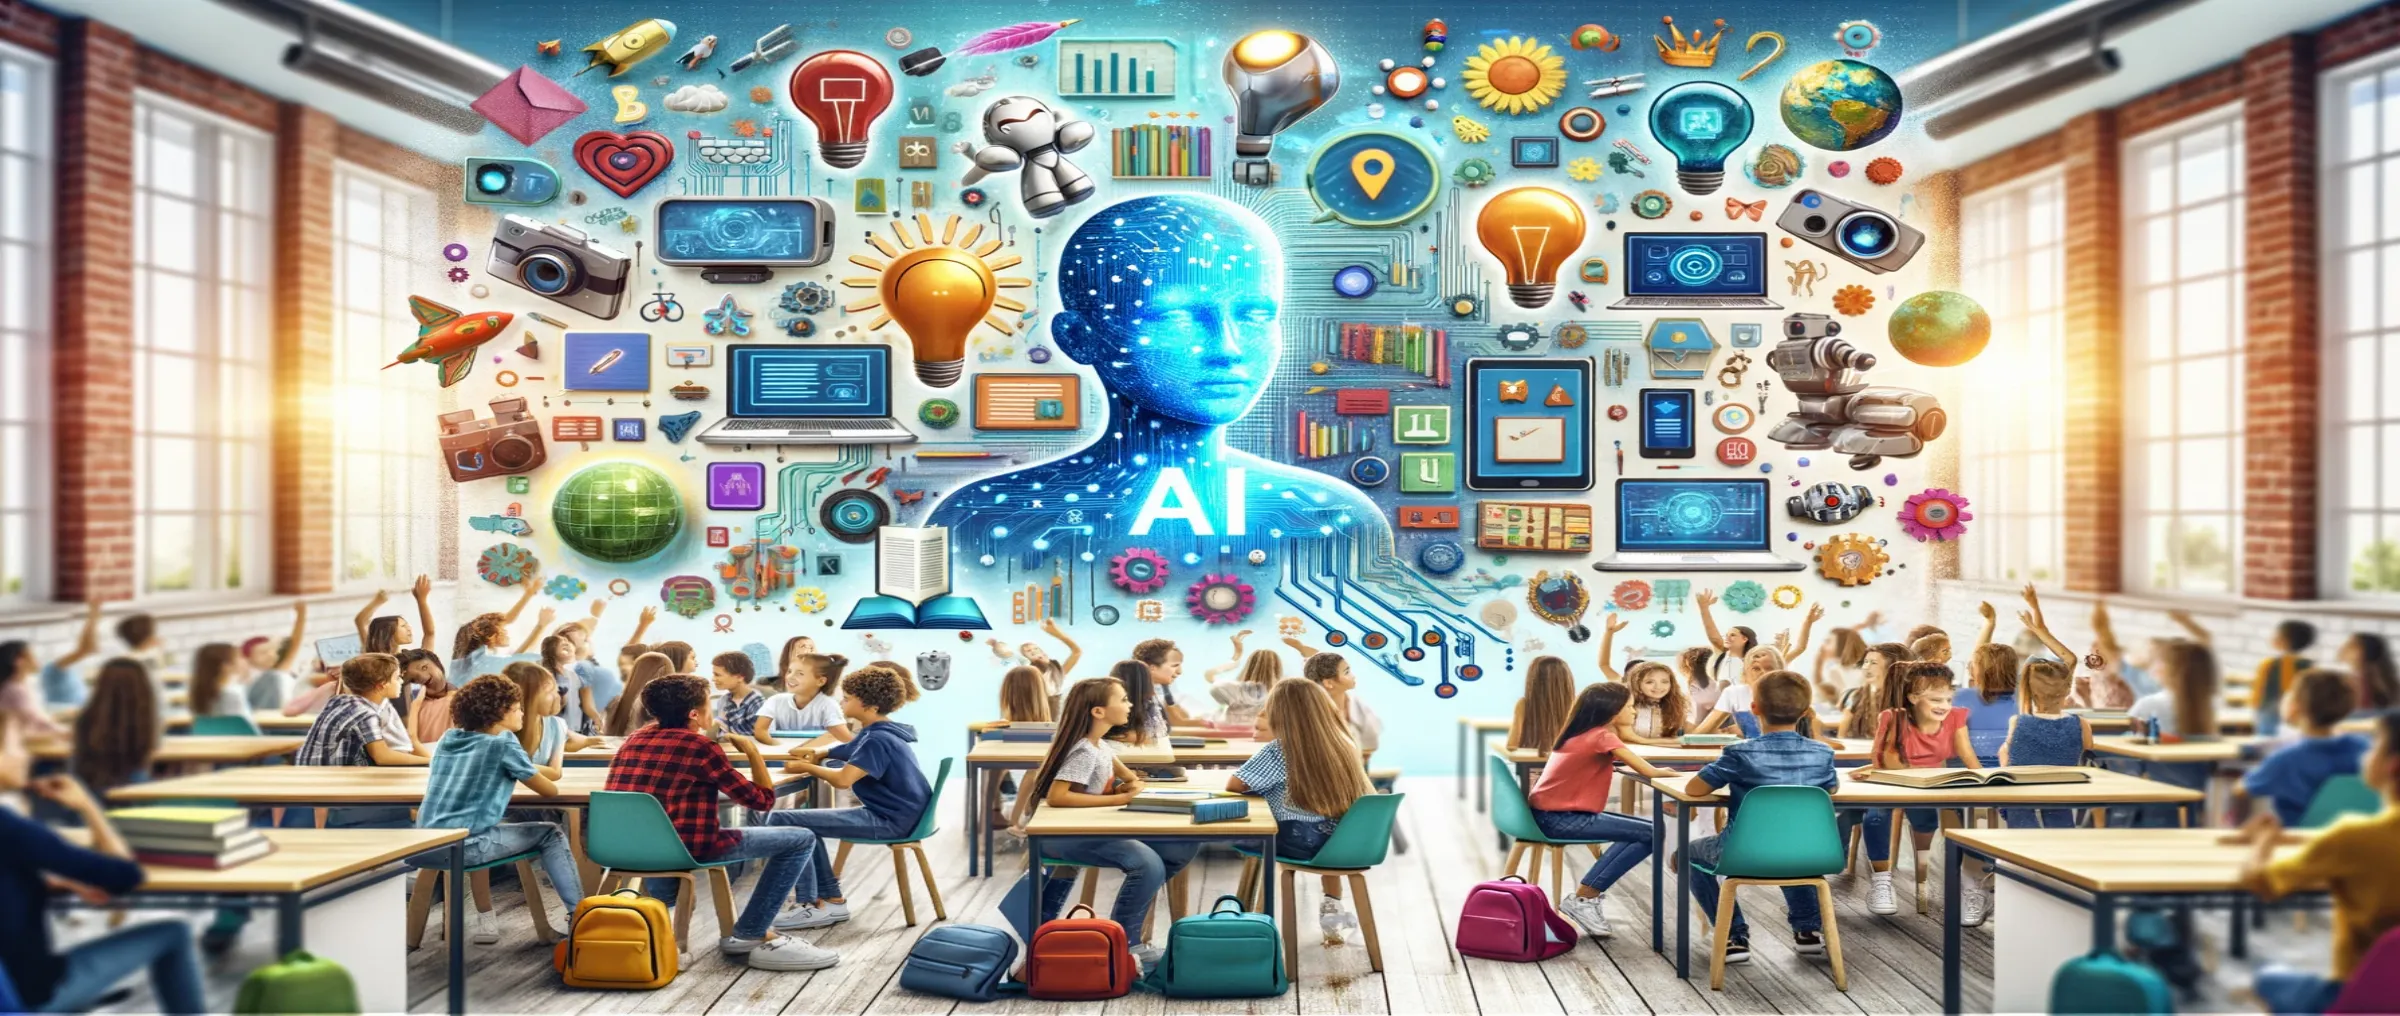 Artificial intelligence in education: Top 5 neural networks for students and schoolchildren